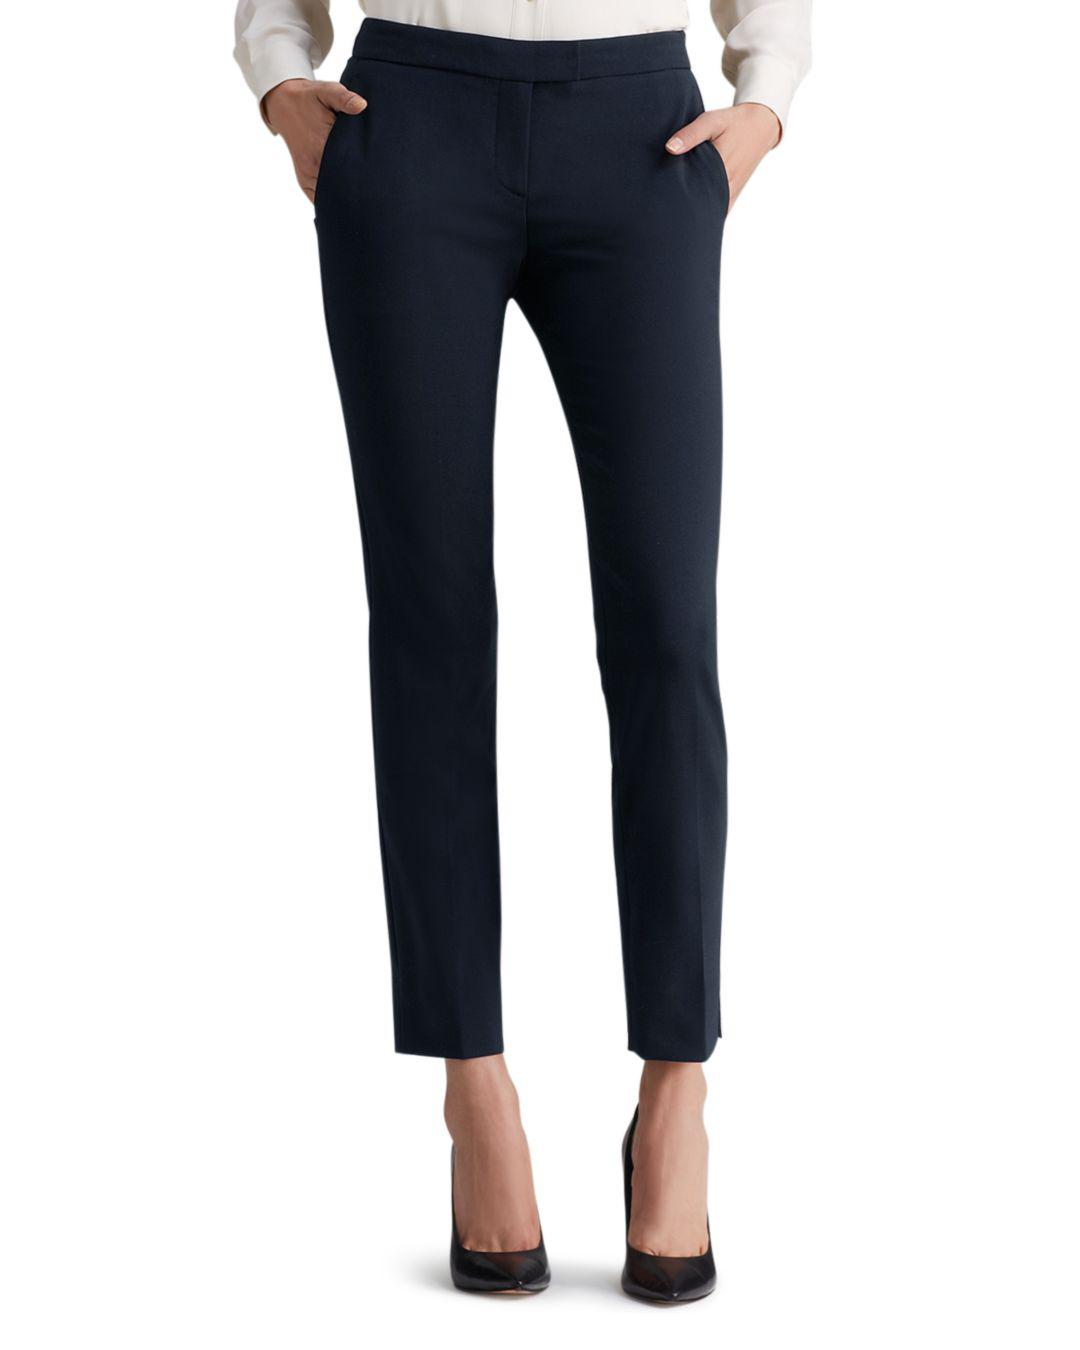 Lyst - Theory Ibbey Admiral Crepe Pants in Blue